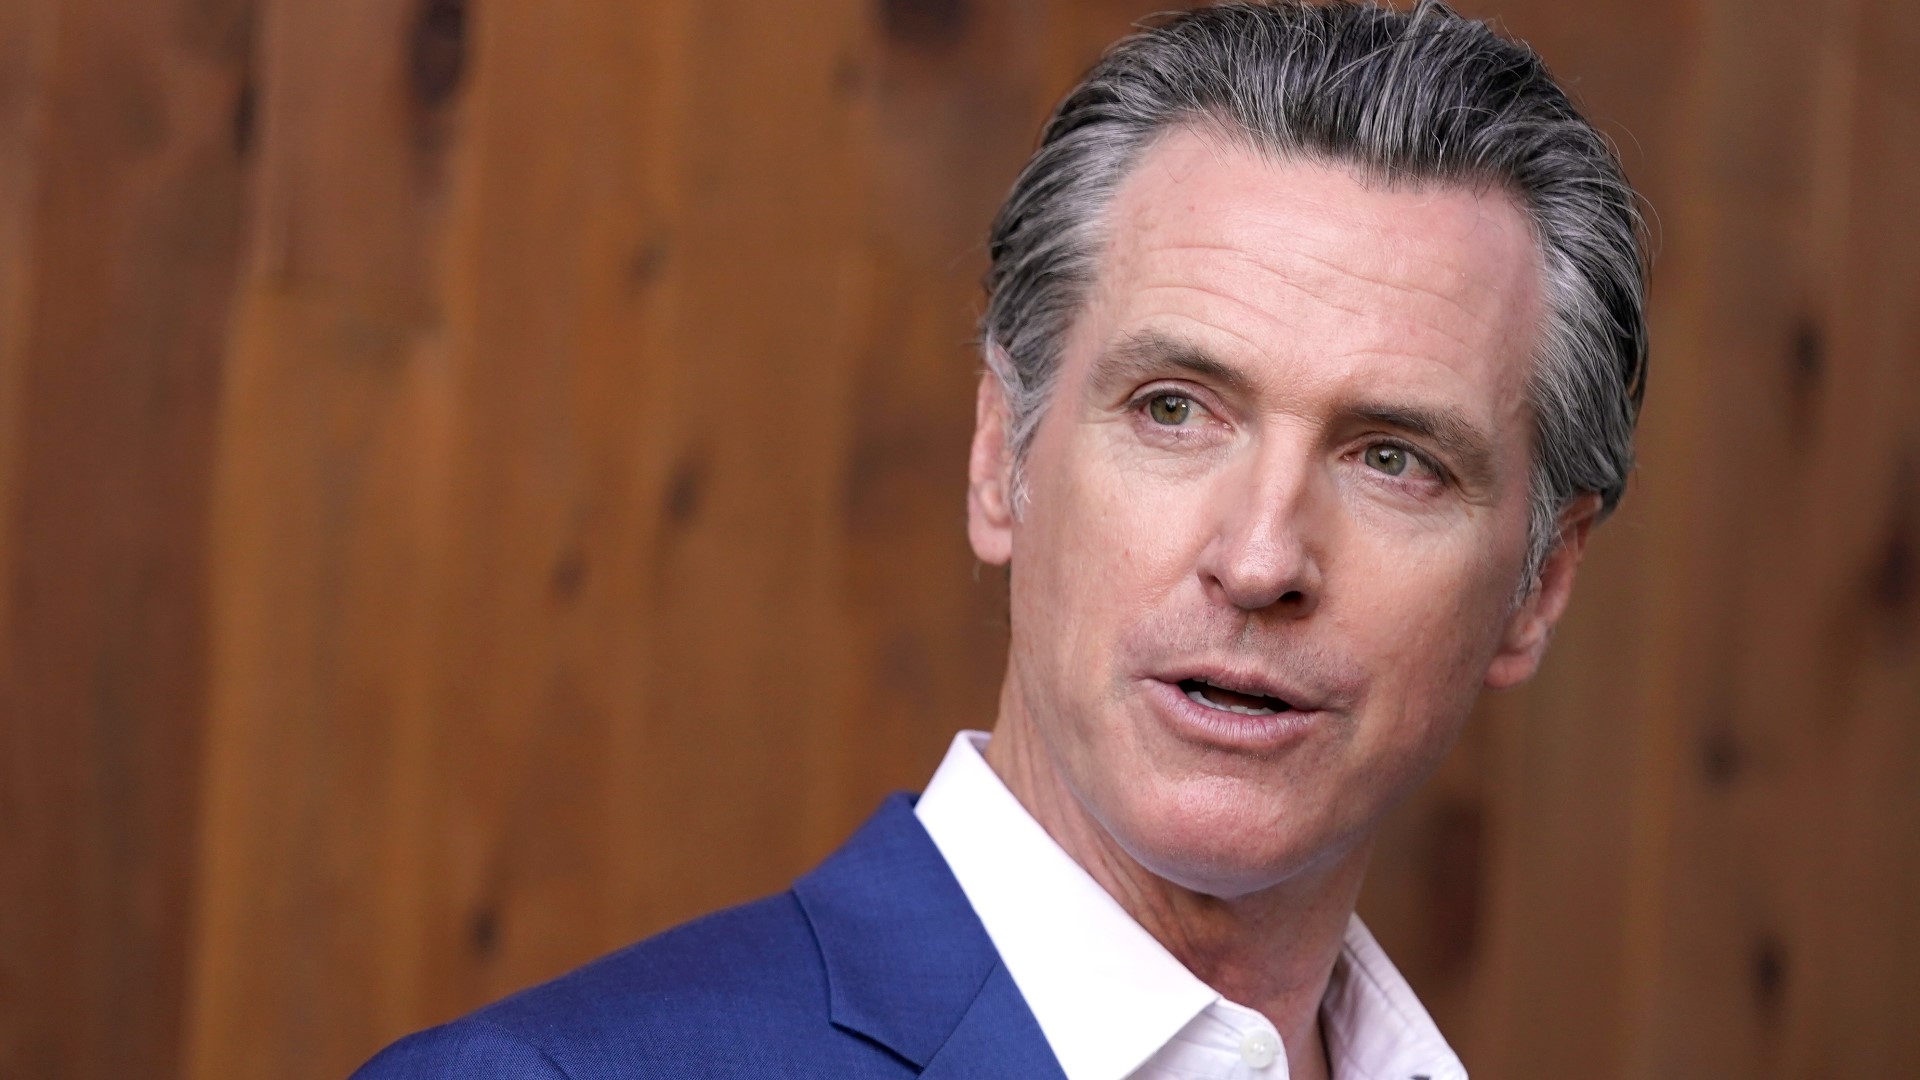 Newsom will be in South Haven for the Van Buren County Democratic Party’s Fourth of July event.